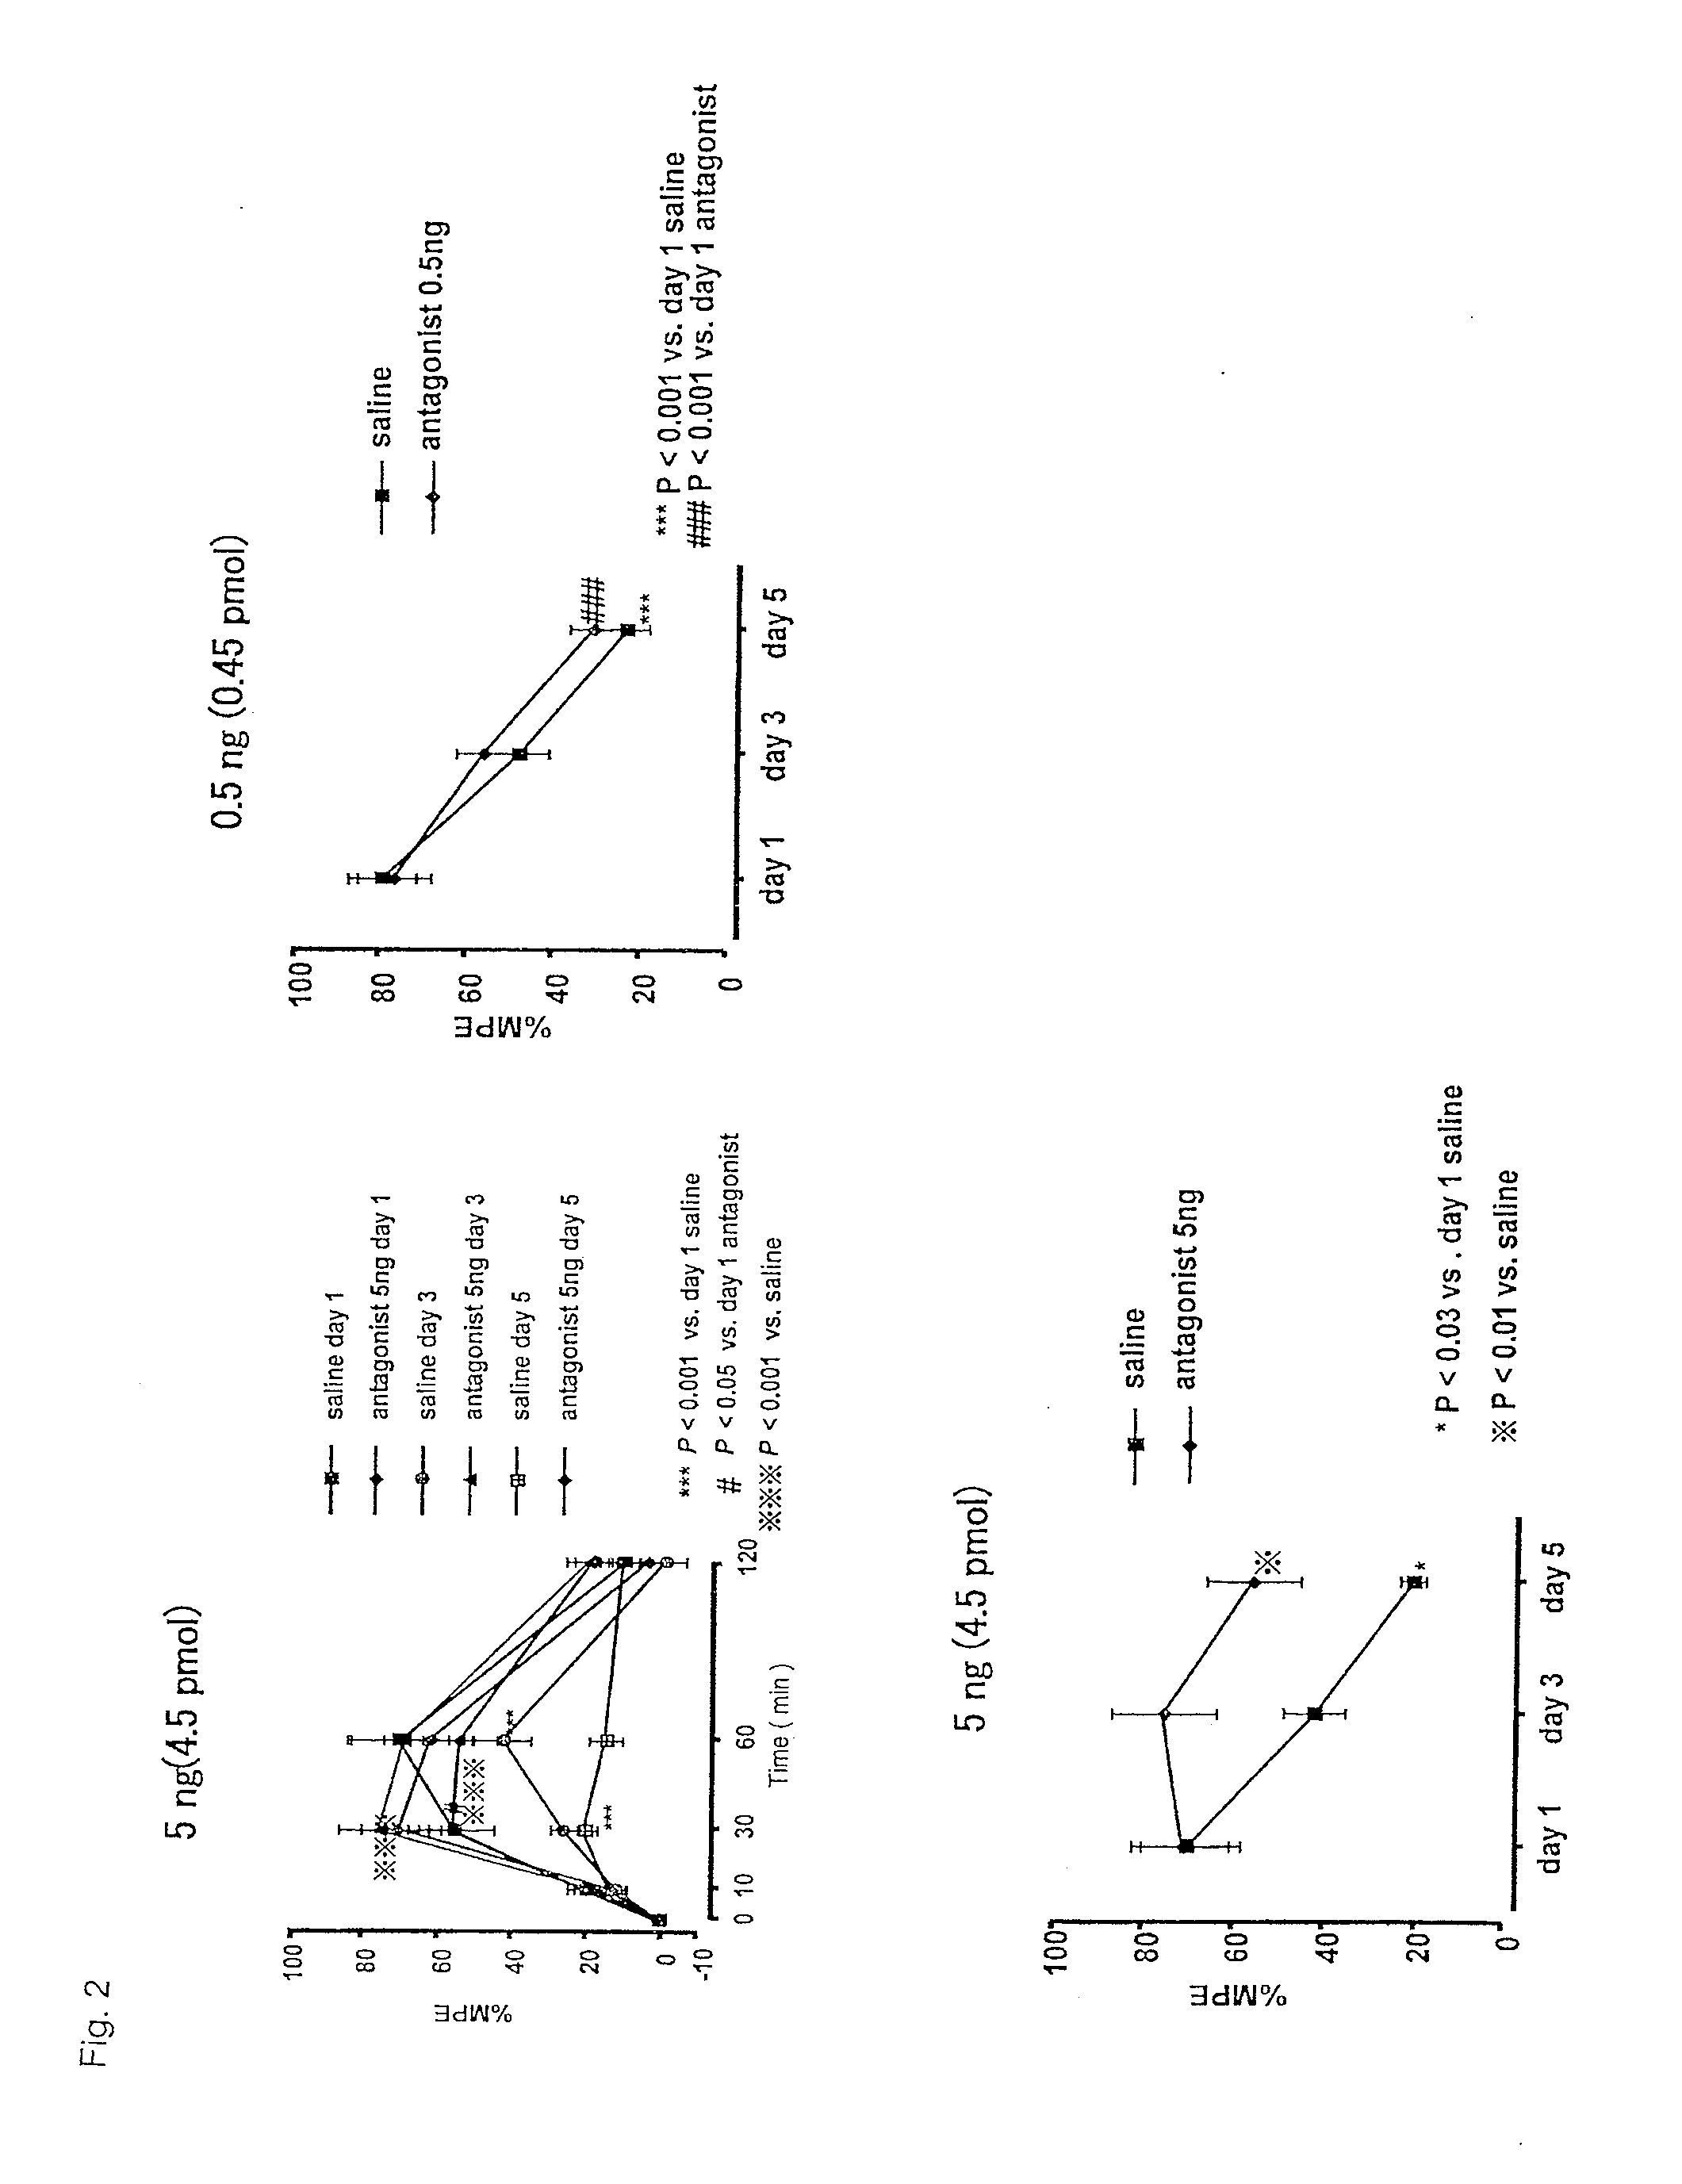 Agent for suppressing development of tolerance to narcotic analgesics